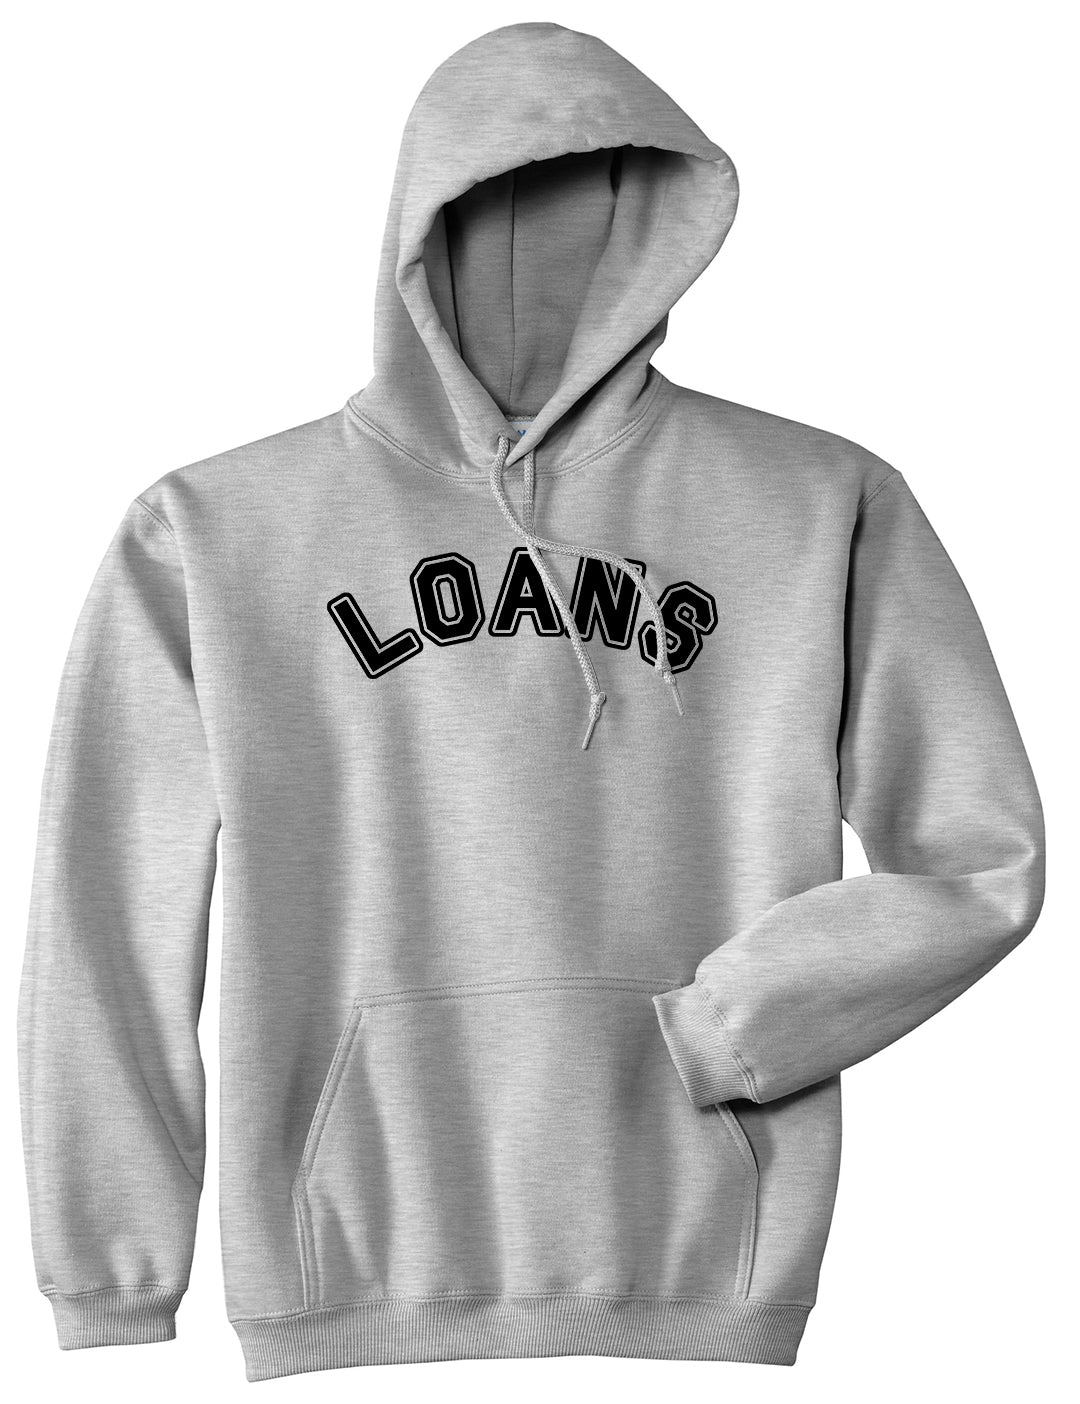 Student Loans College Pullover Hoodie in Grey